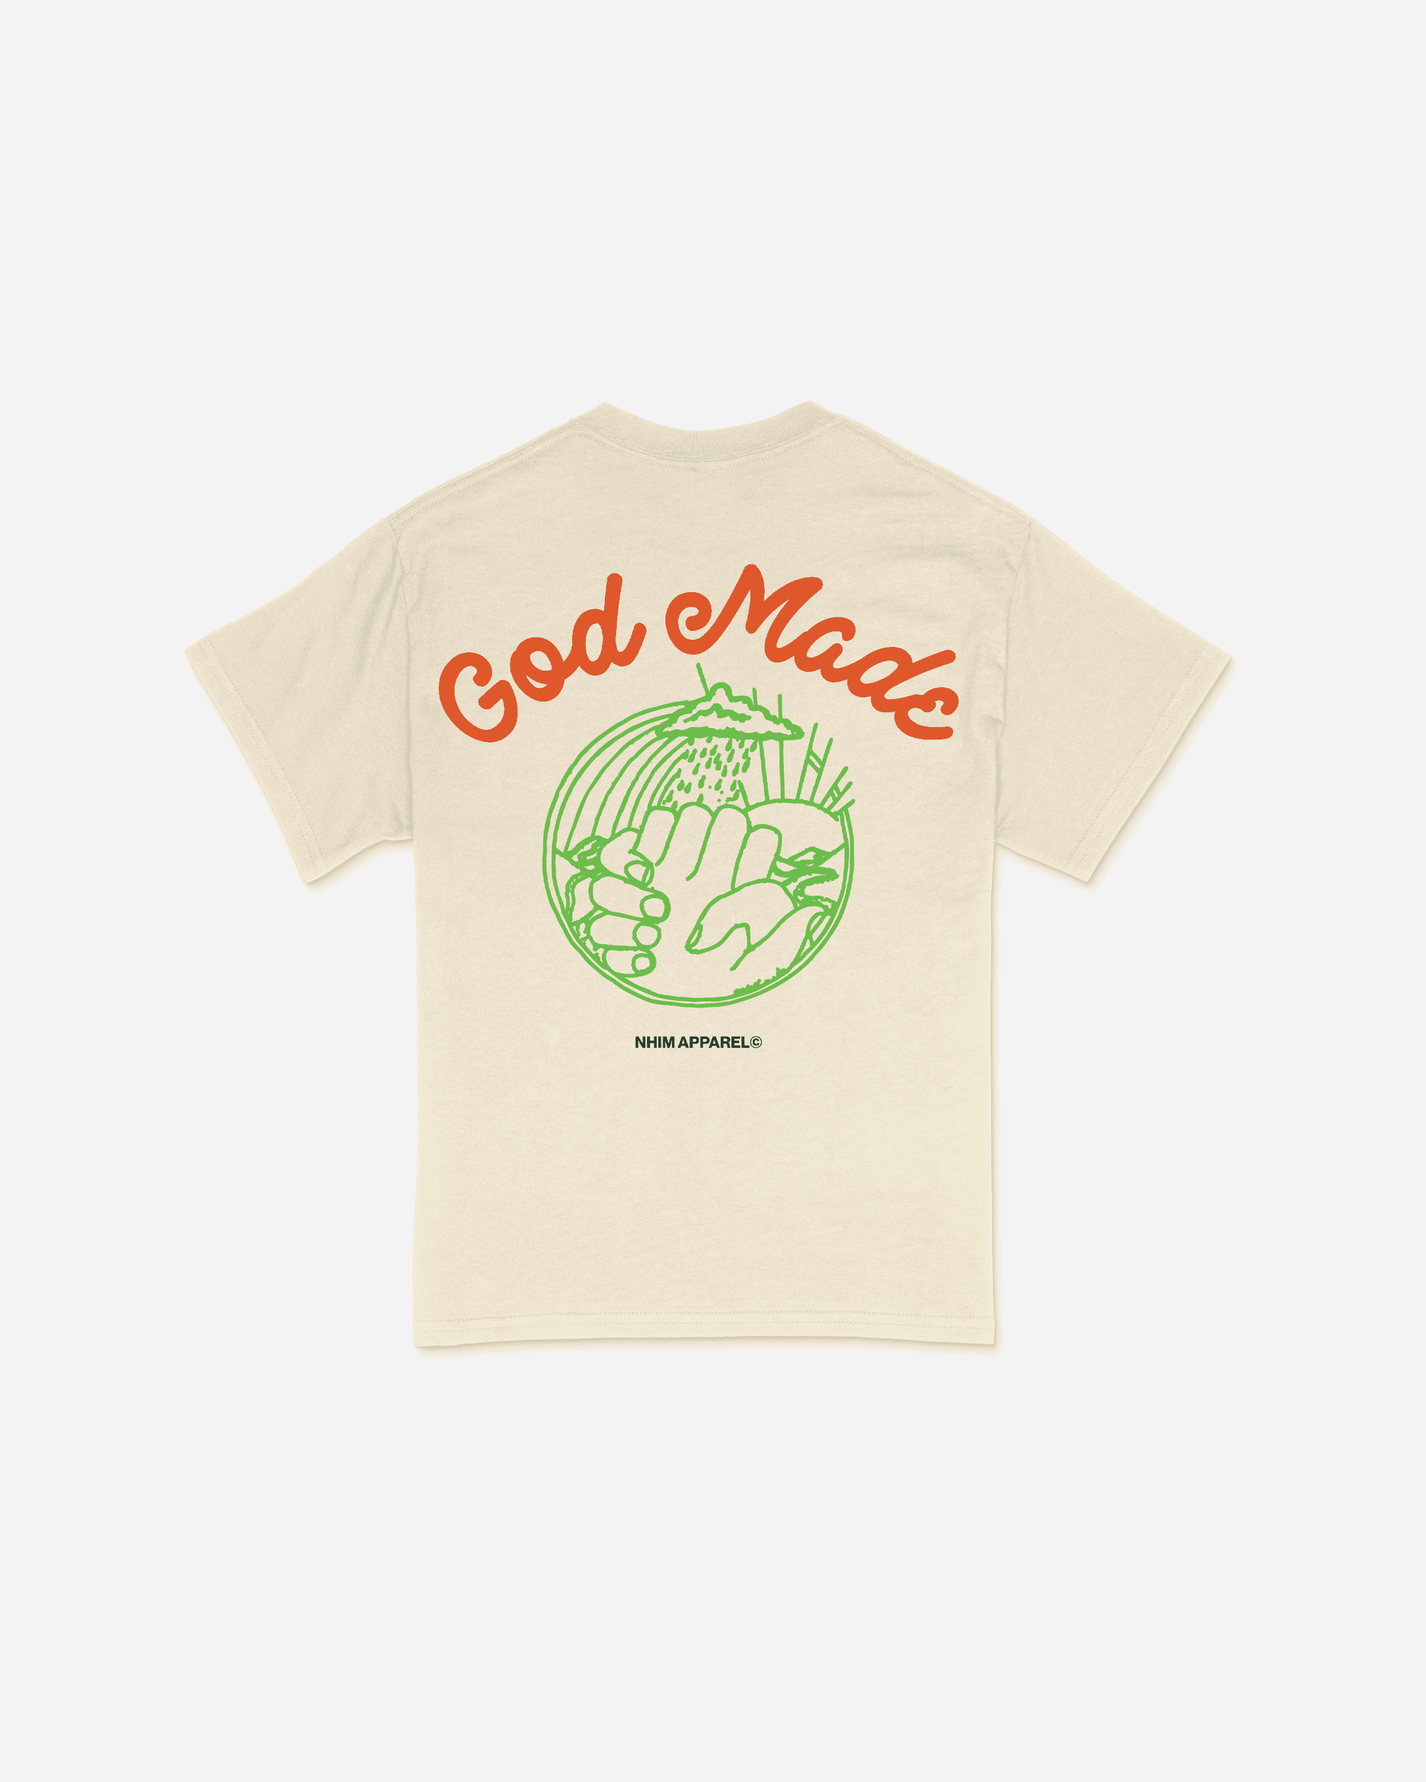 Home › Best Sellers › GOD MADE CREATION TEE (NATURAL)